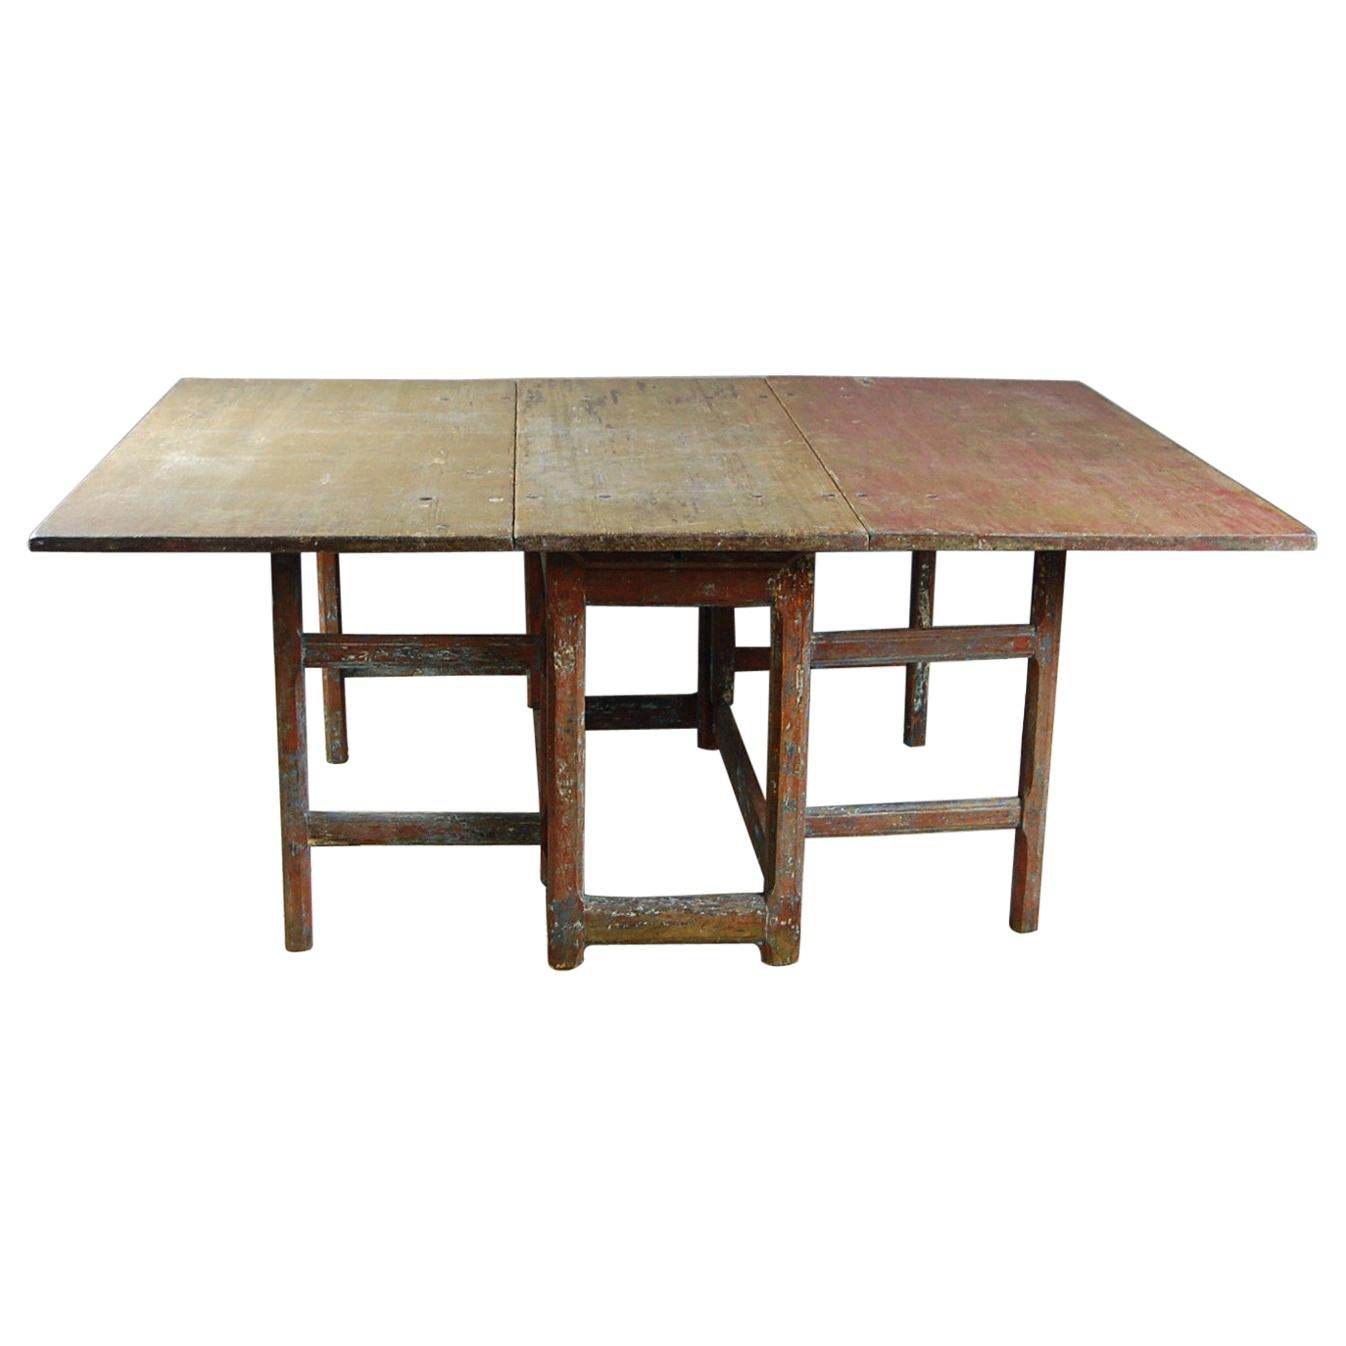 Large 19th Century Swedish Slagbord or Drop-Leaf Country Table